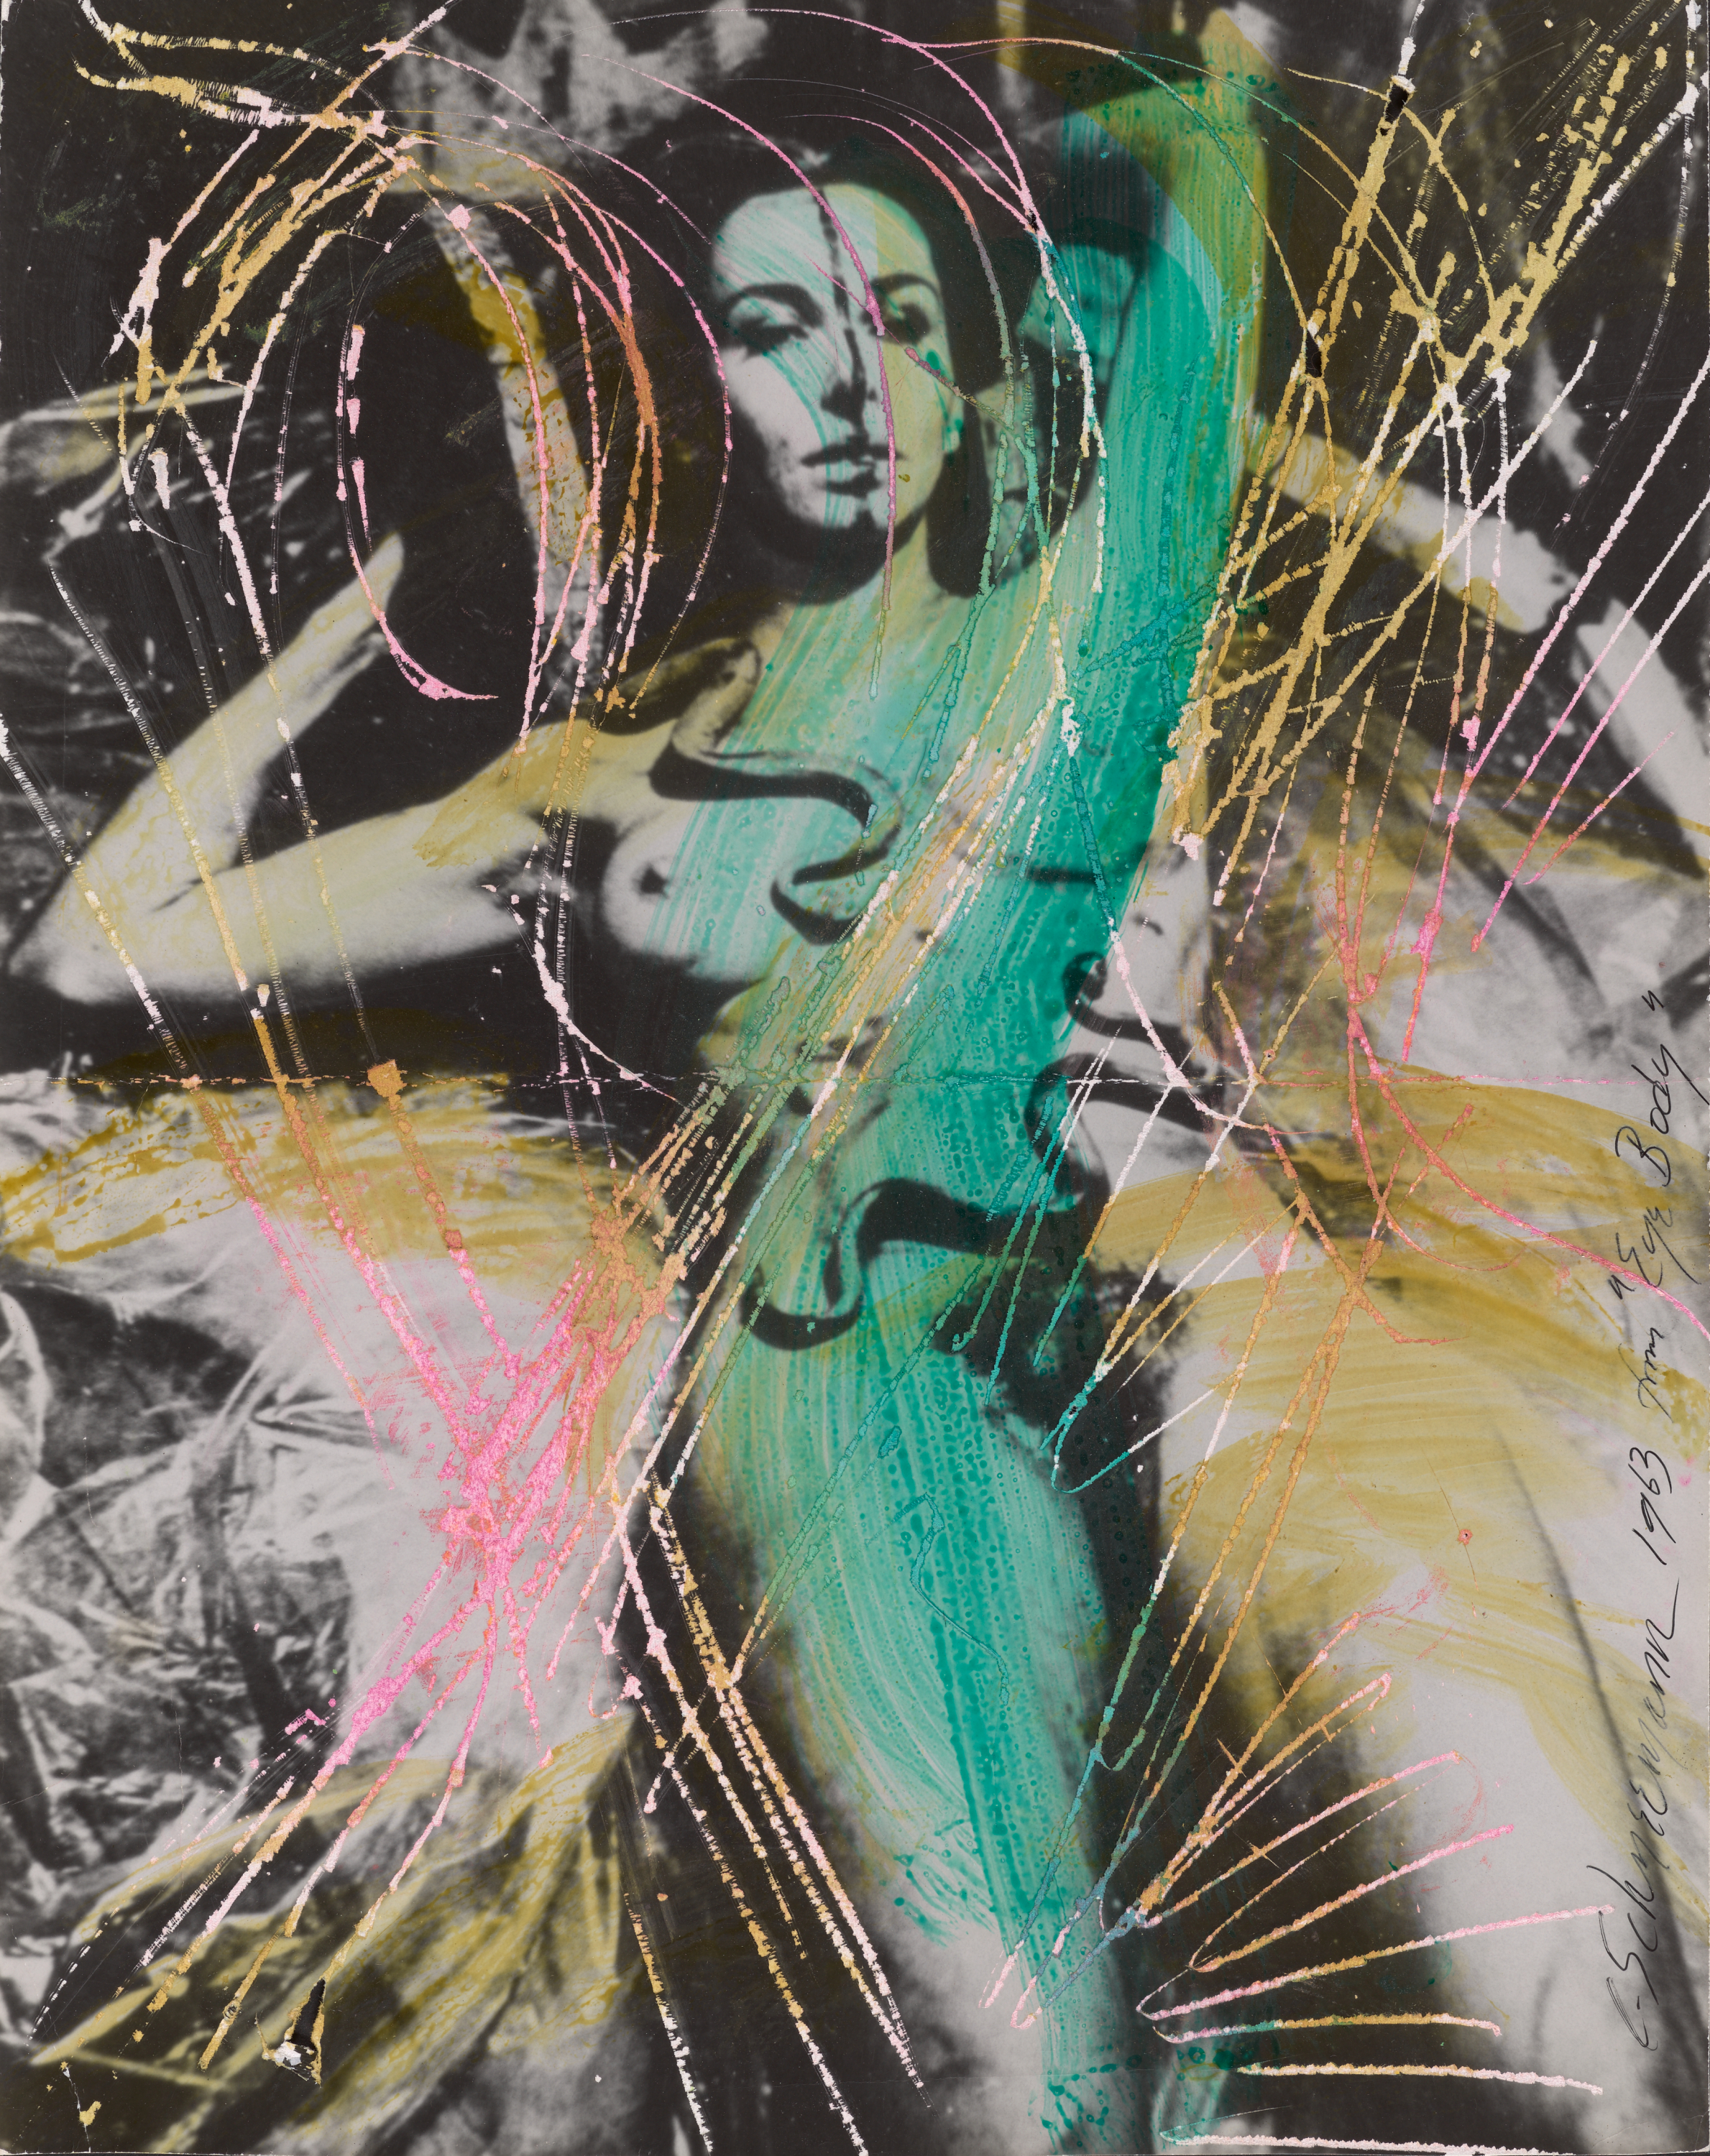 A black and white photograph of a relaxed, naked woman reclined with her hands behind her head and two snakes on her abdomen. The photograph is scratched and colored with yellow, green, and pink marker.